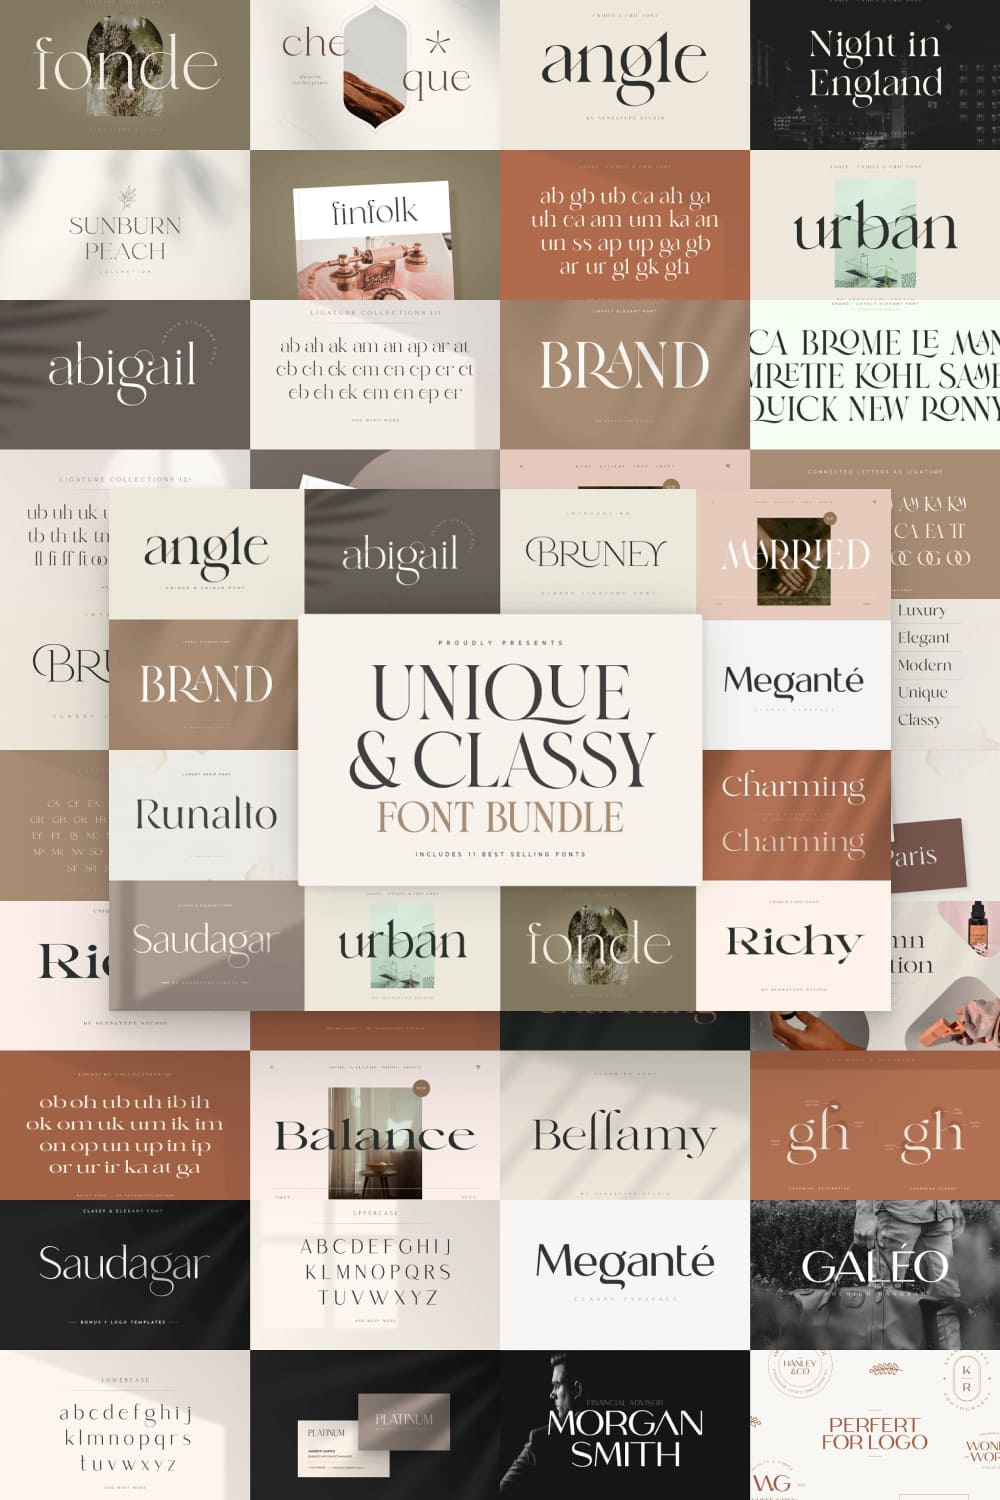 This is perfect for BRANDING and LOGO DESIGN. You will get unique, classy, elegant, and certainly beauty to make your branding.